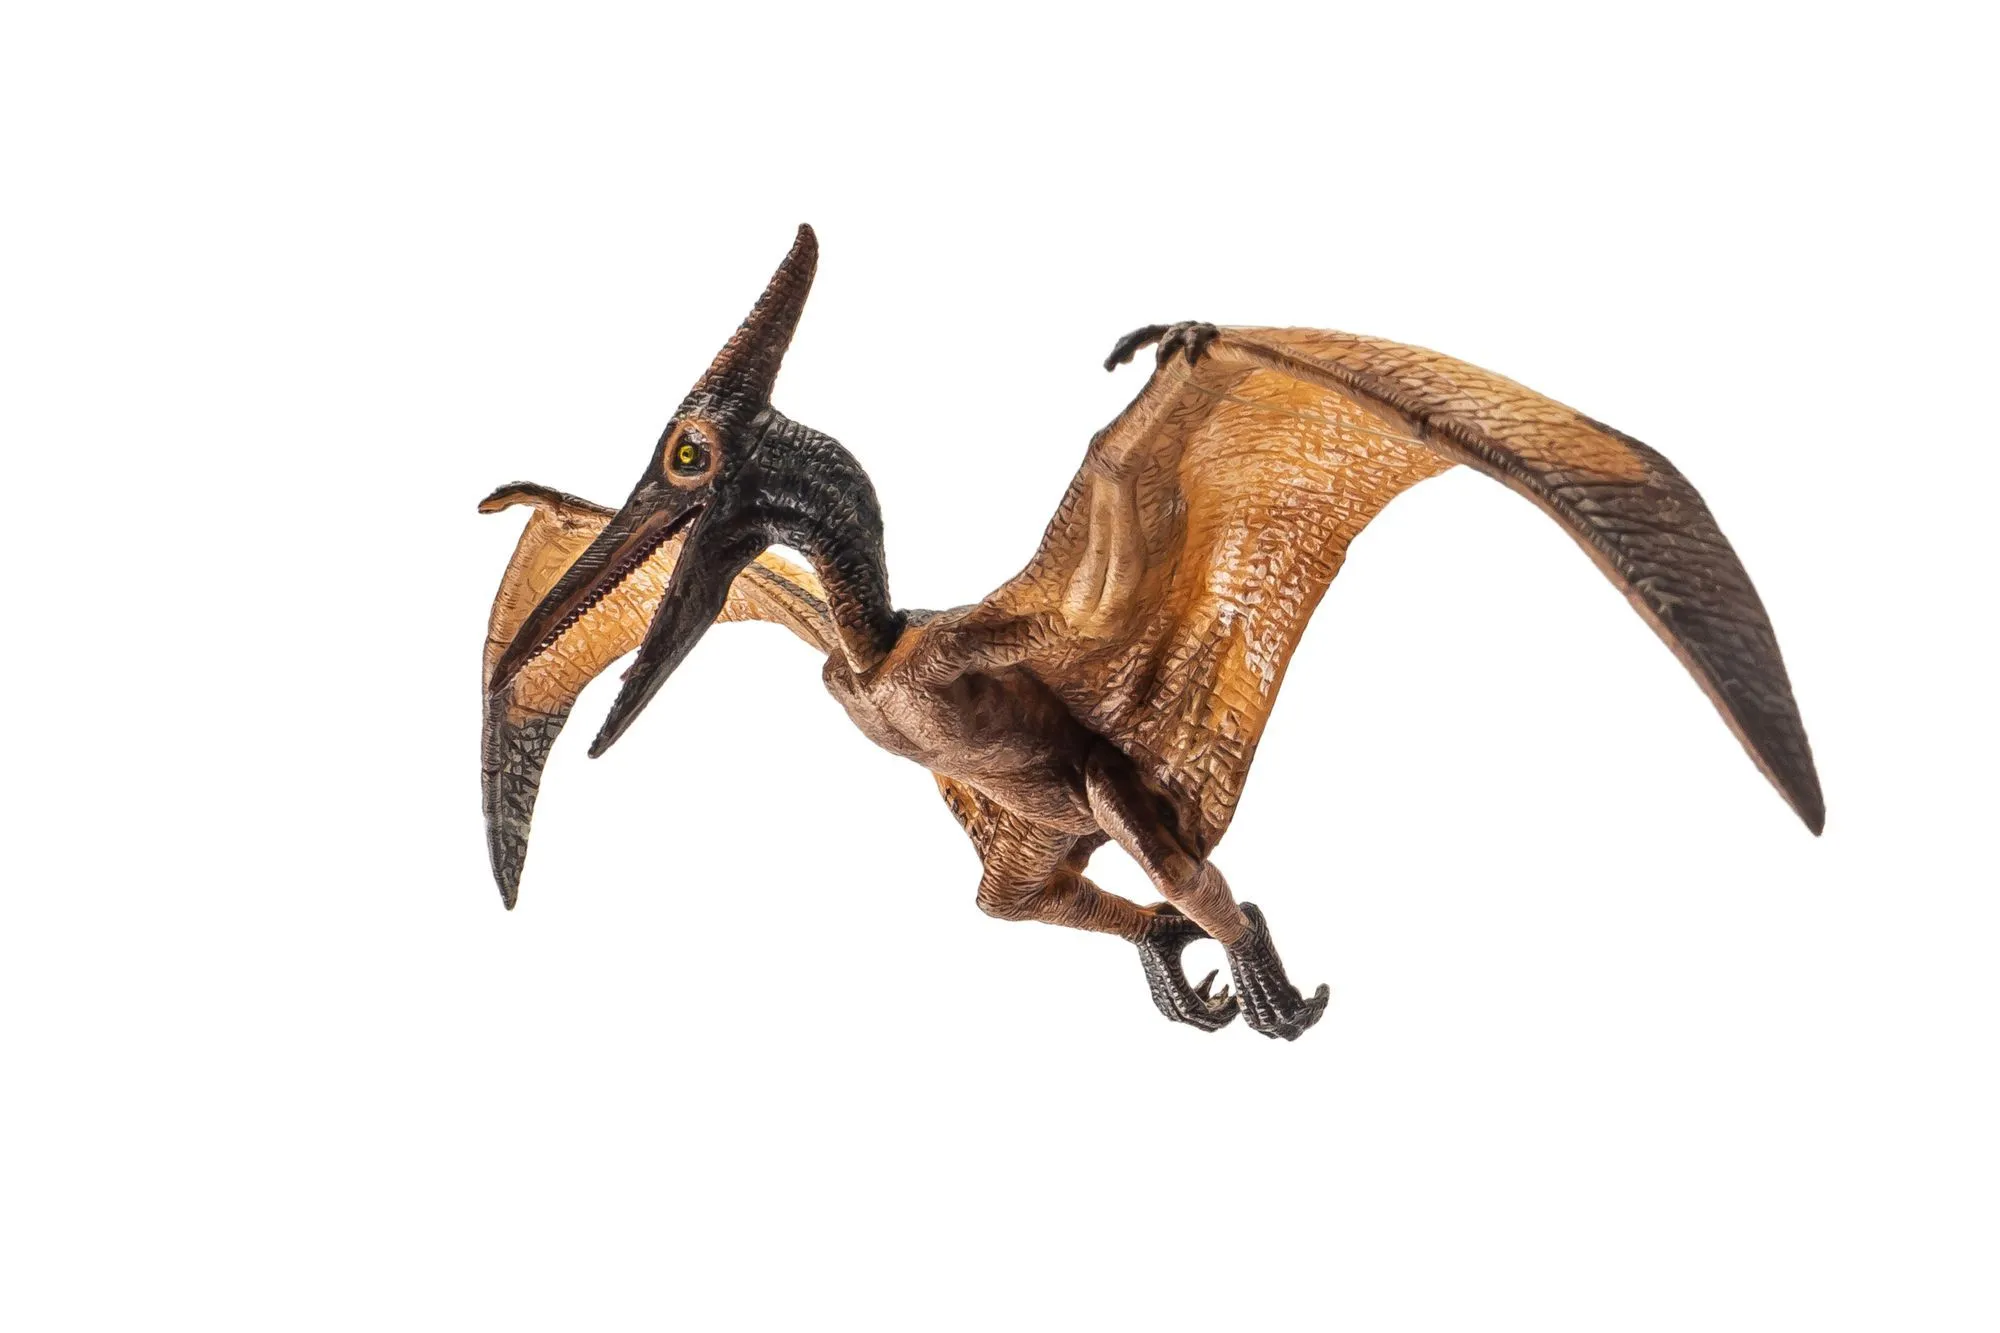 Pterodactyl facts include that it was the first Pterosaur to be found and named.